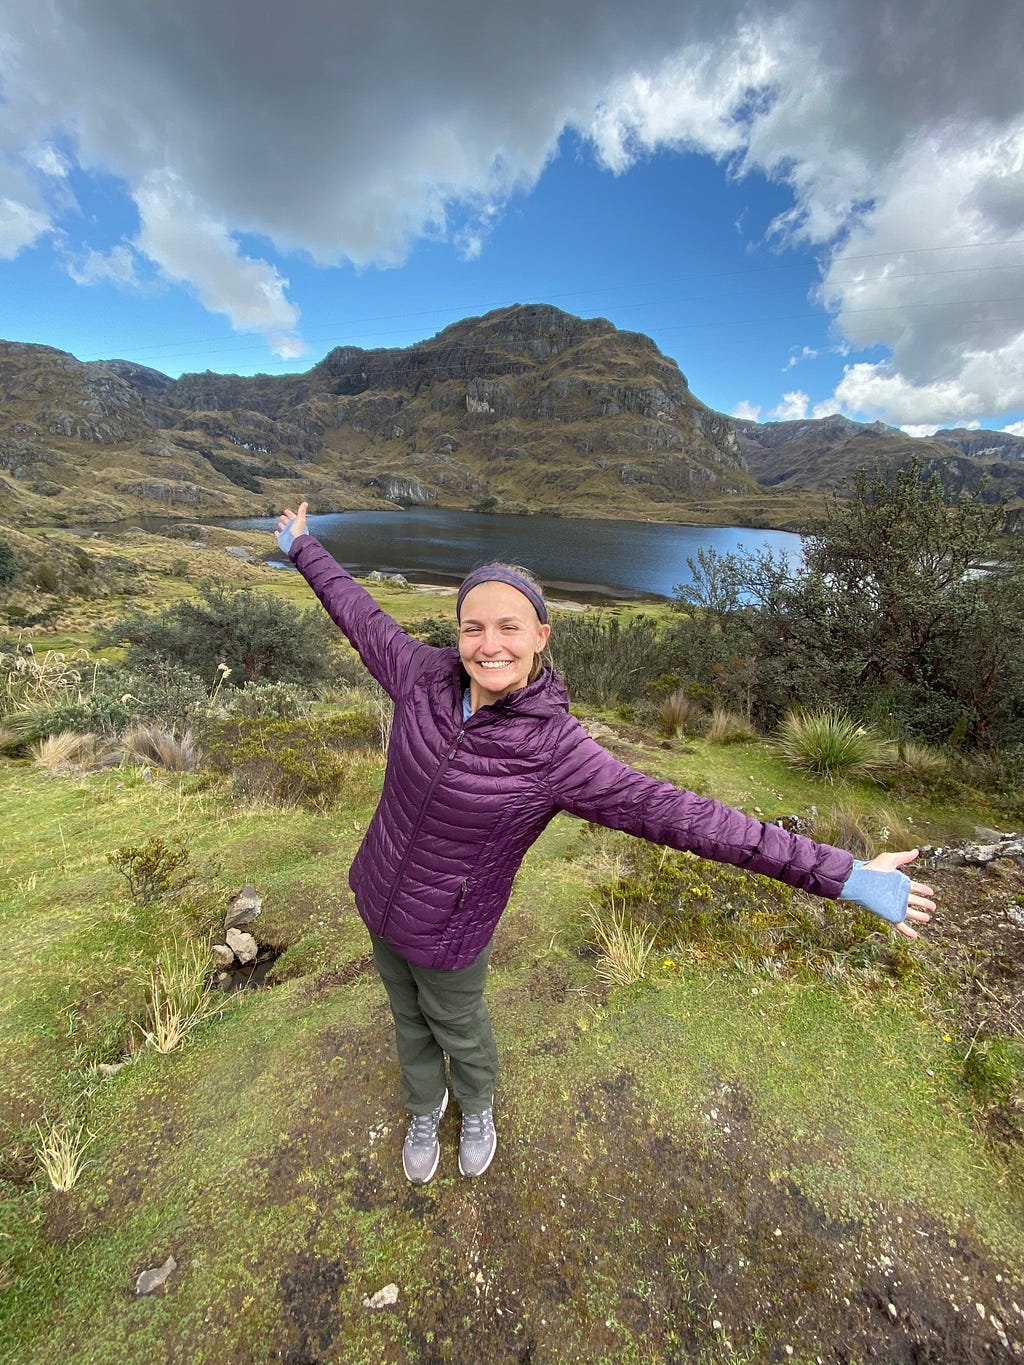 All smiles and squinty eyes after our hike in El Cajas National Park of Ecuador